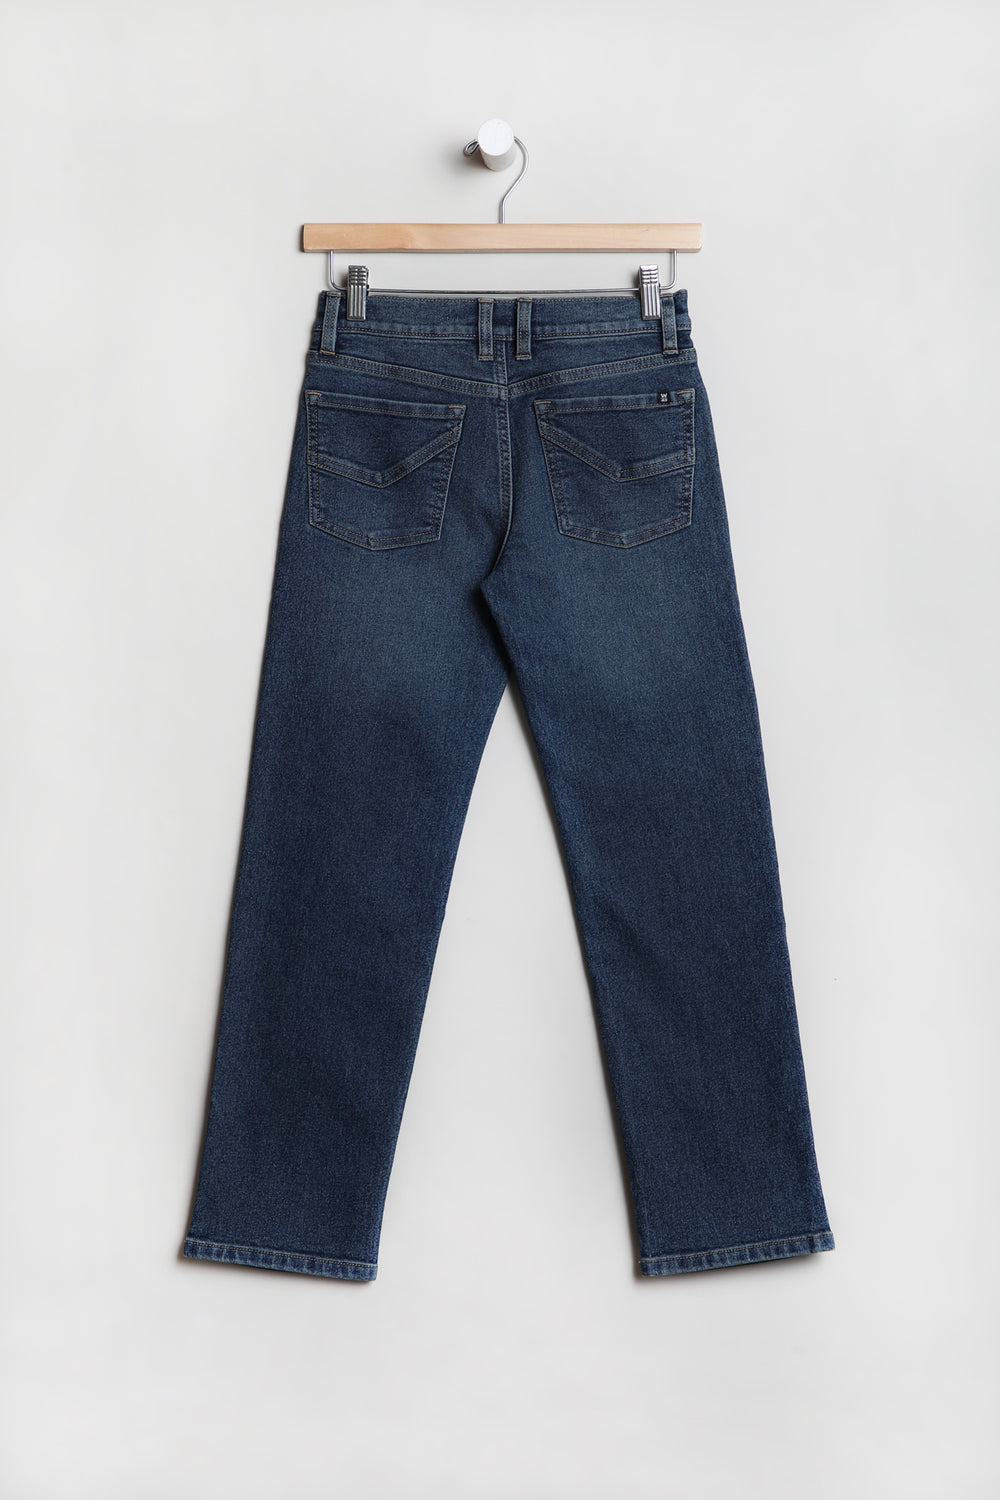 West49 Youth Dark Stone Relaxed Jeans West49 Youth Dark Stone Relaxed Jeans